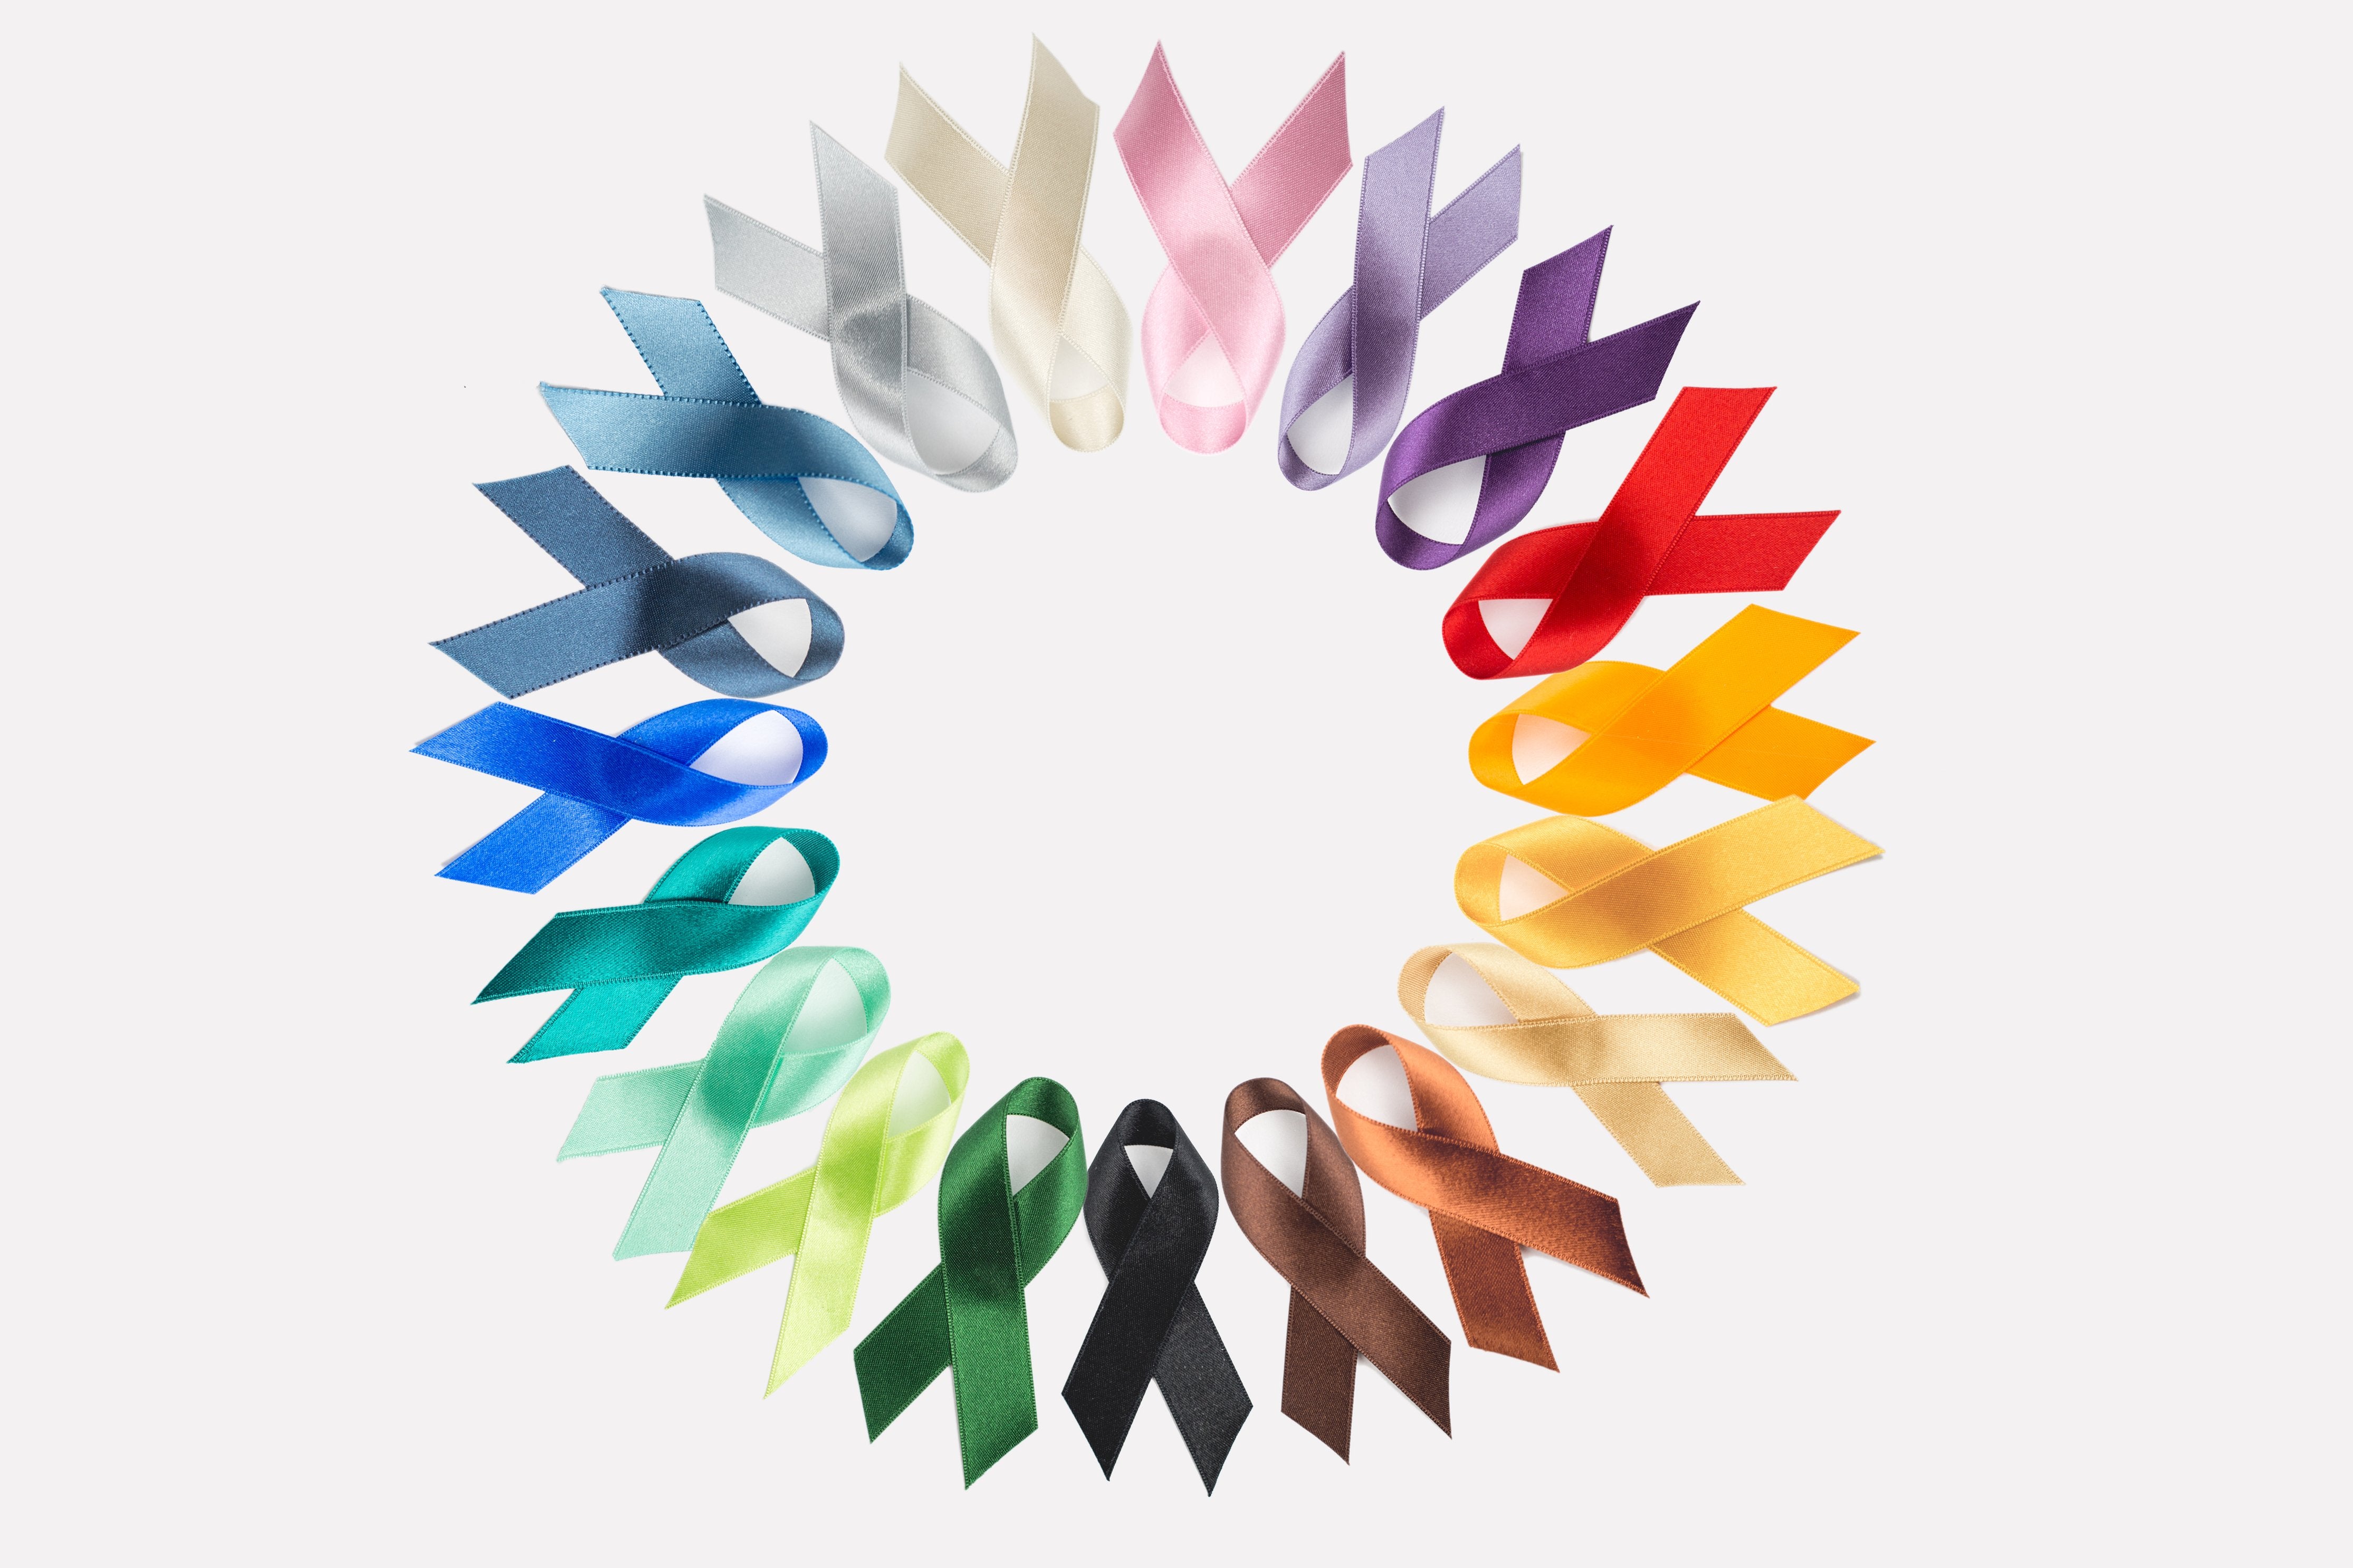 bone cancer ribbon colors meanings